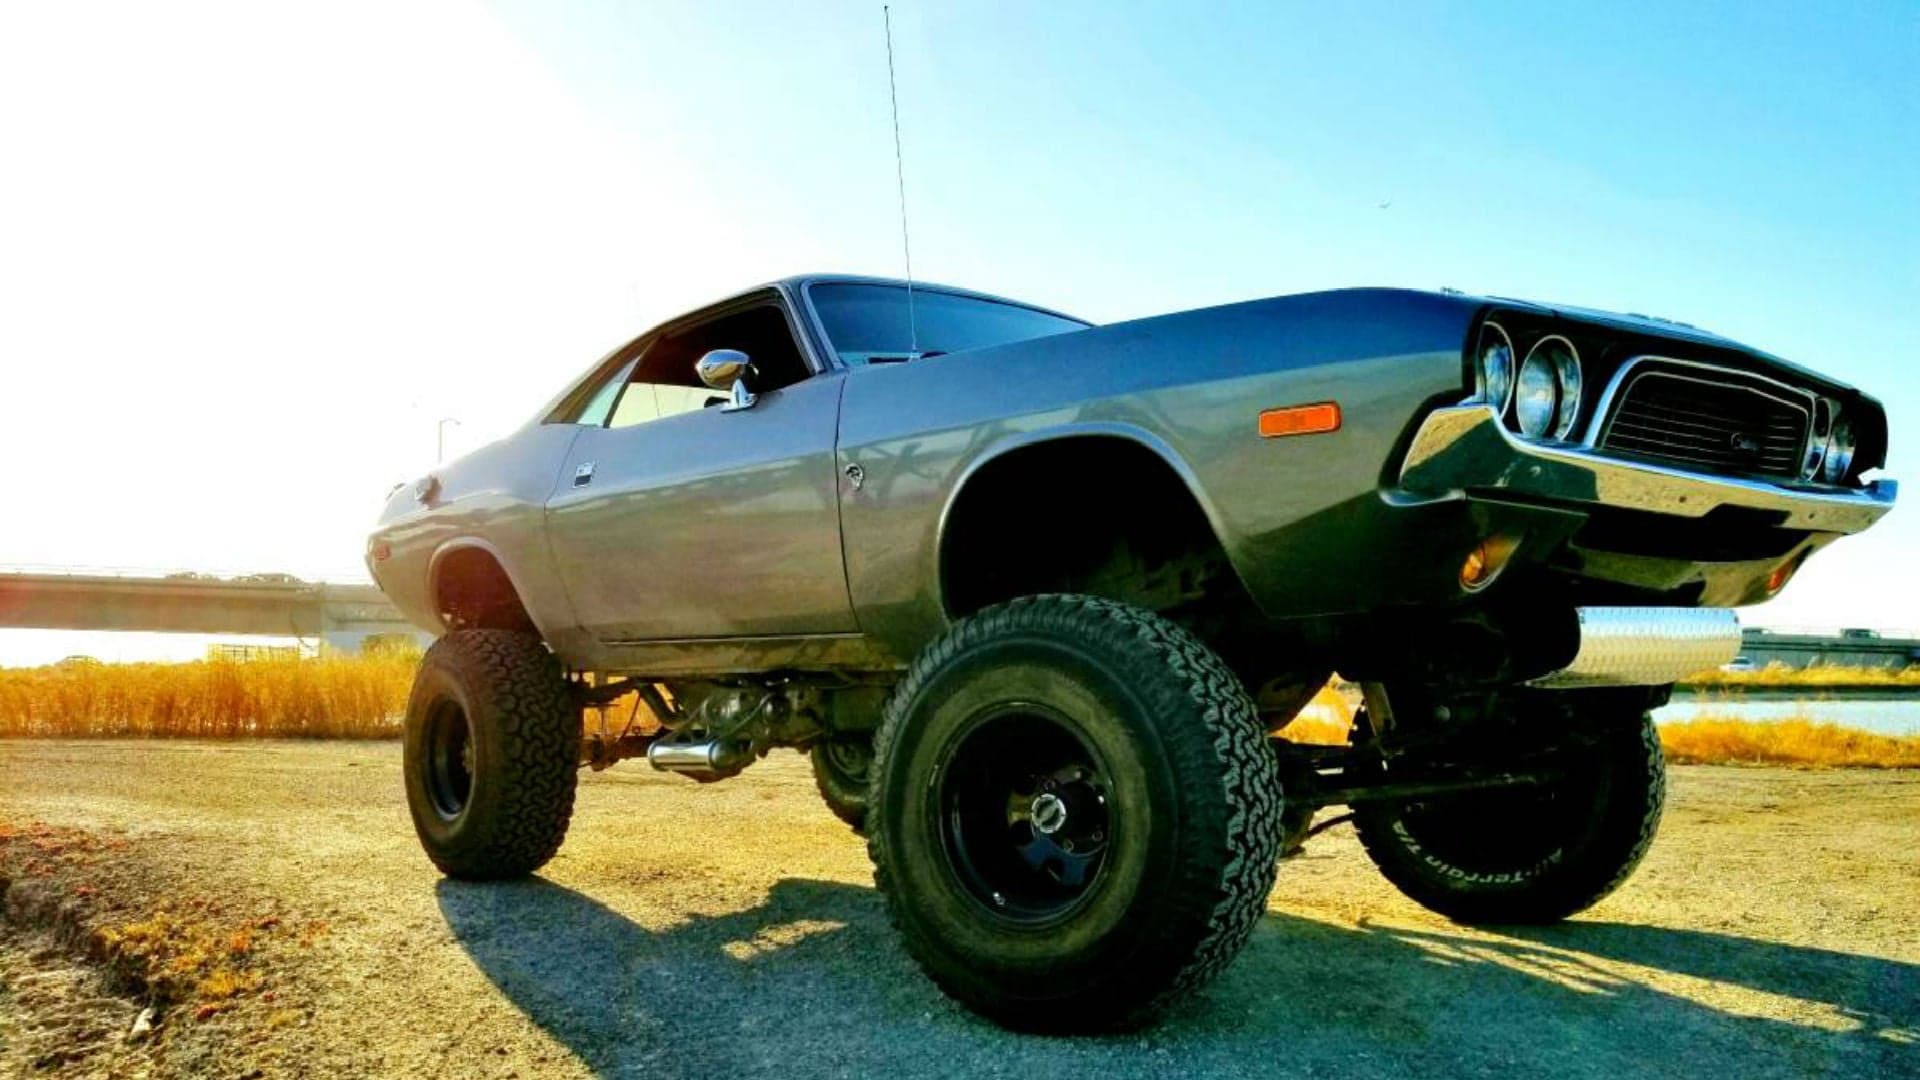 Grow a Pair and Buy This Lifted 1972 Dodge Challenger